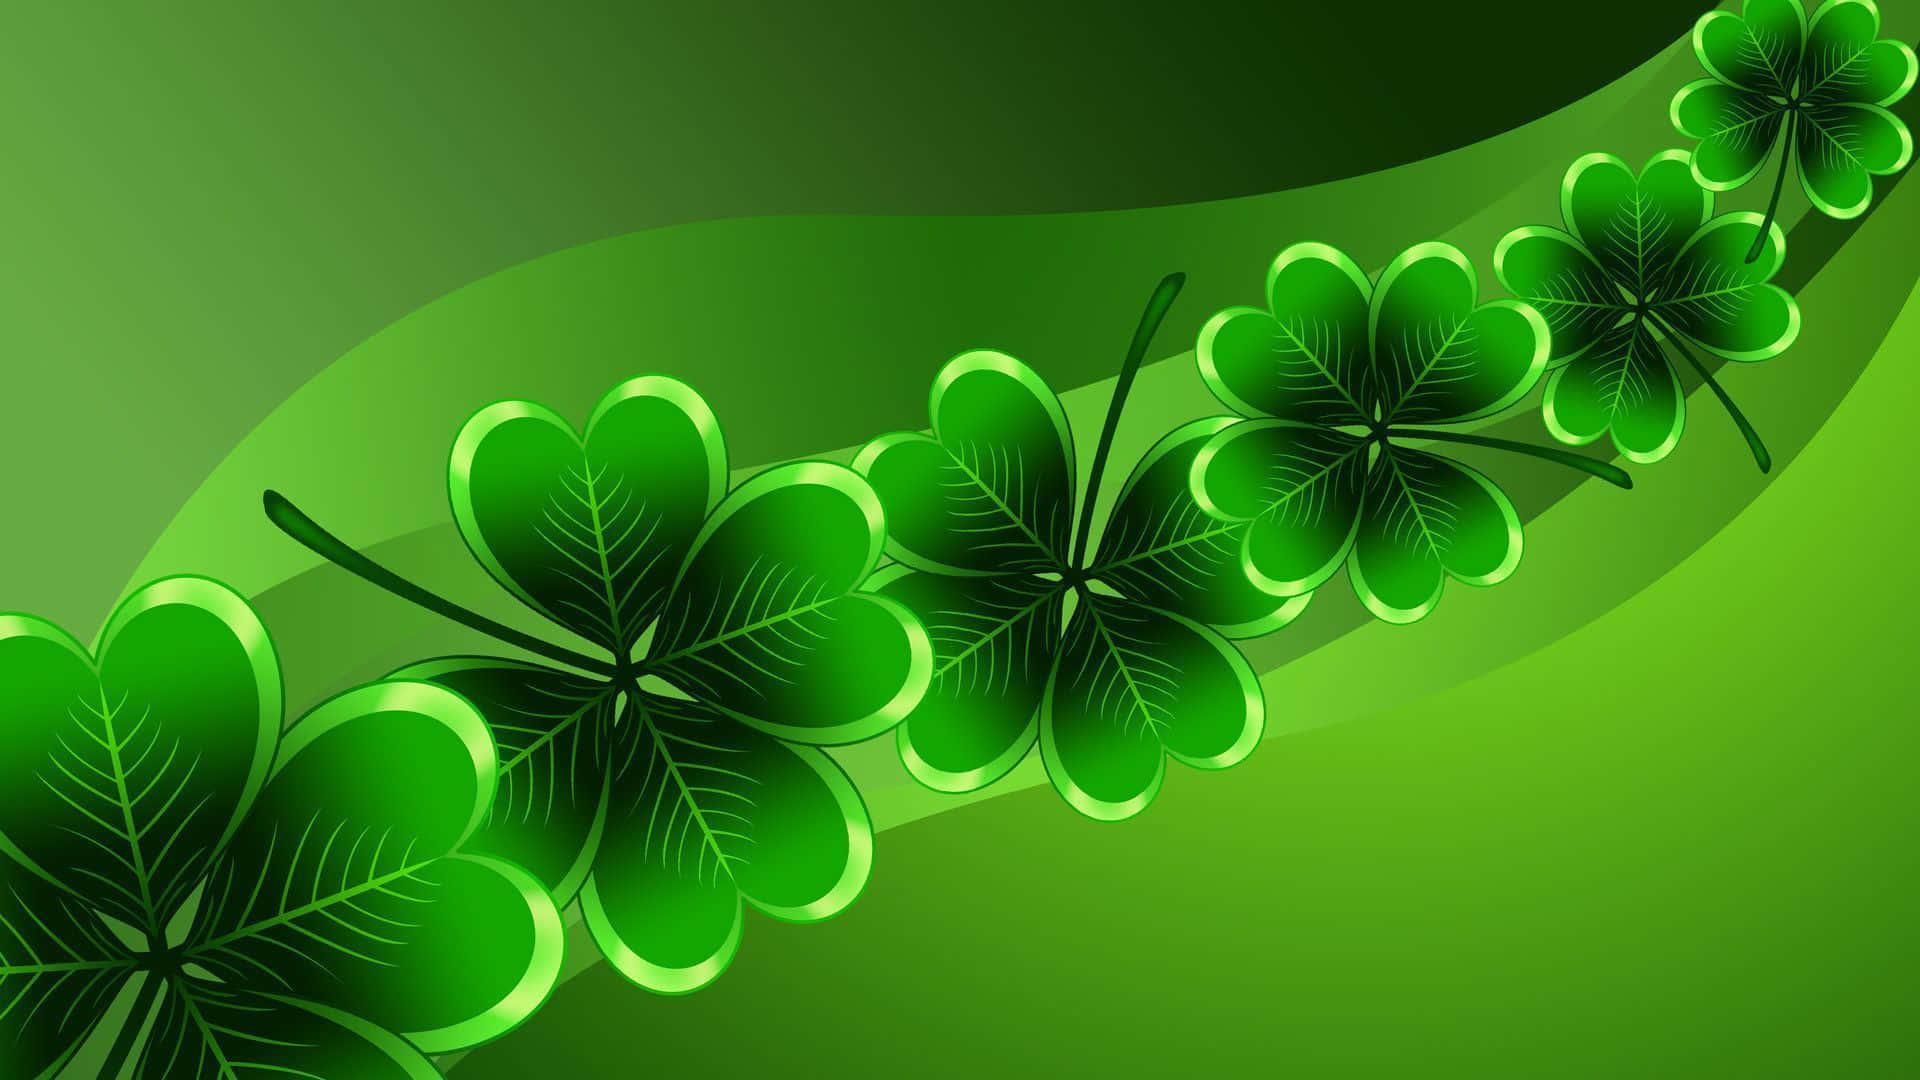 Celebrate St Patrick's Day in style with a festive Zoom call!